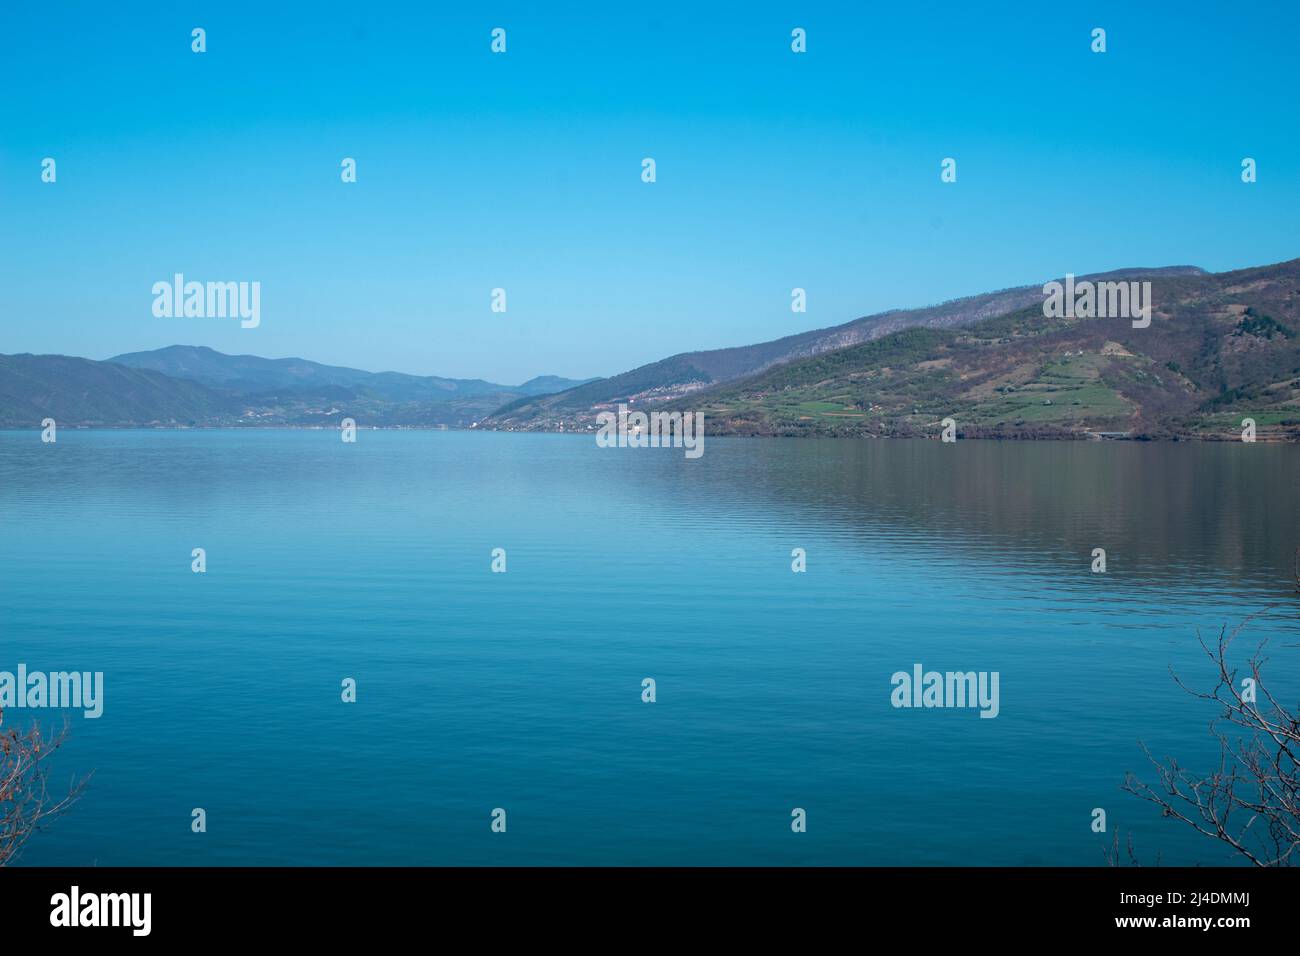 View of the Danube from the banks of Donji Milanovac. Stock Photo